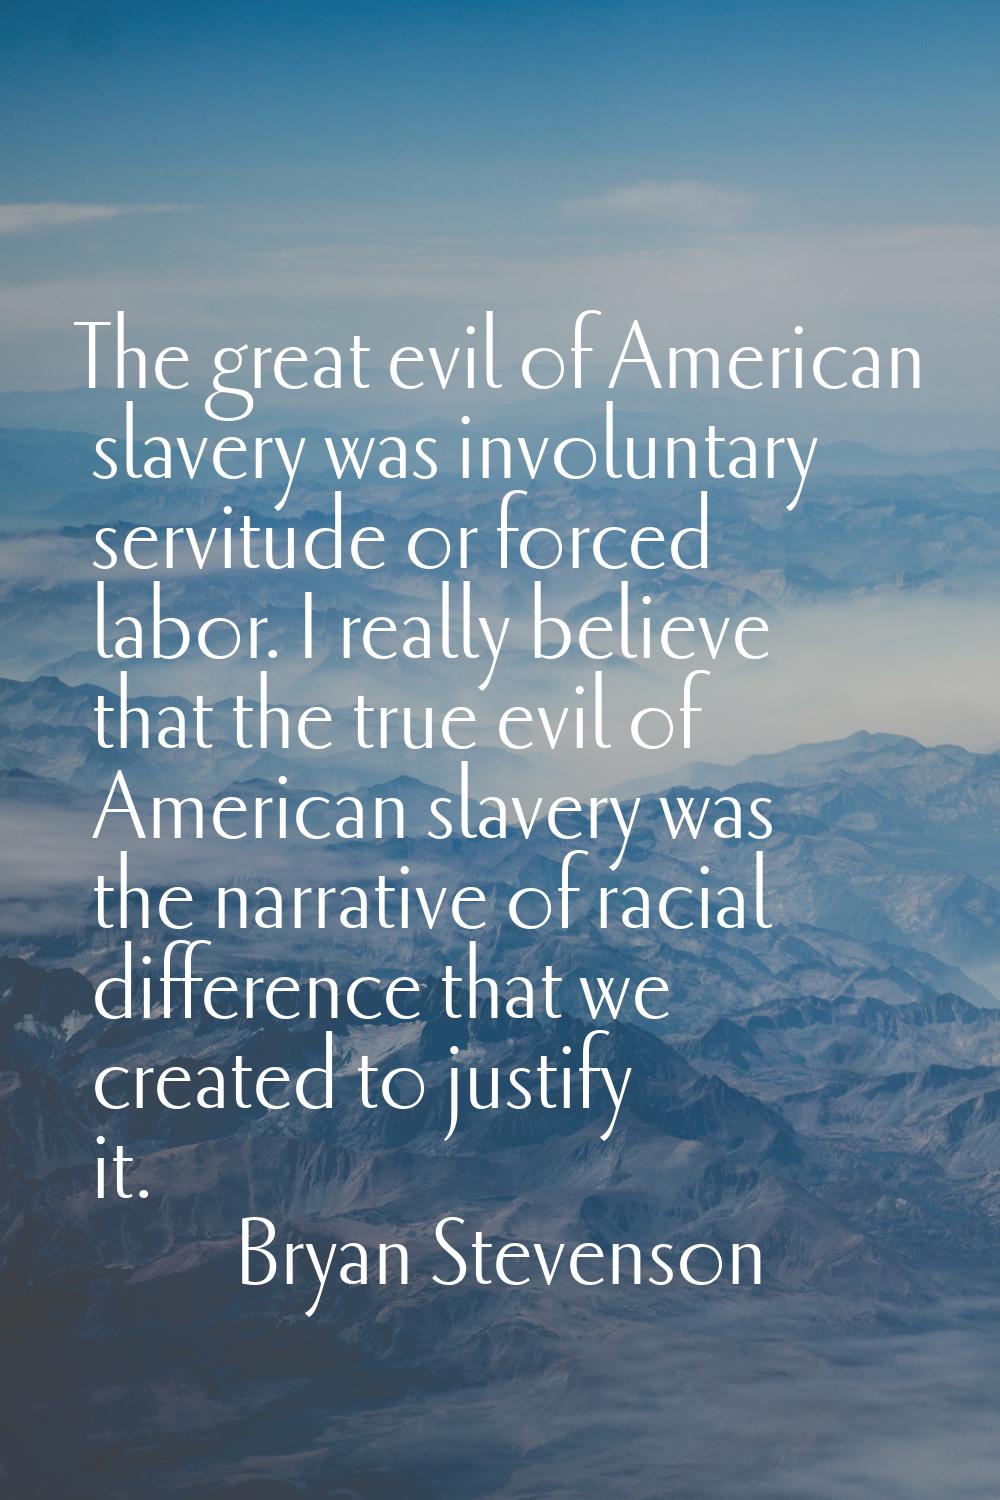 The great evil of American slavery was involuntary servitude or forced labor. I really believe that